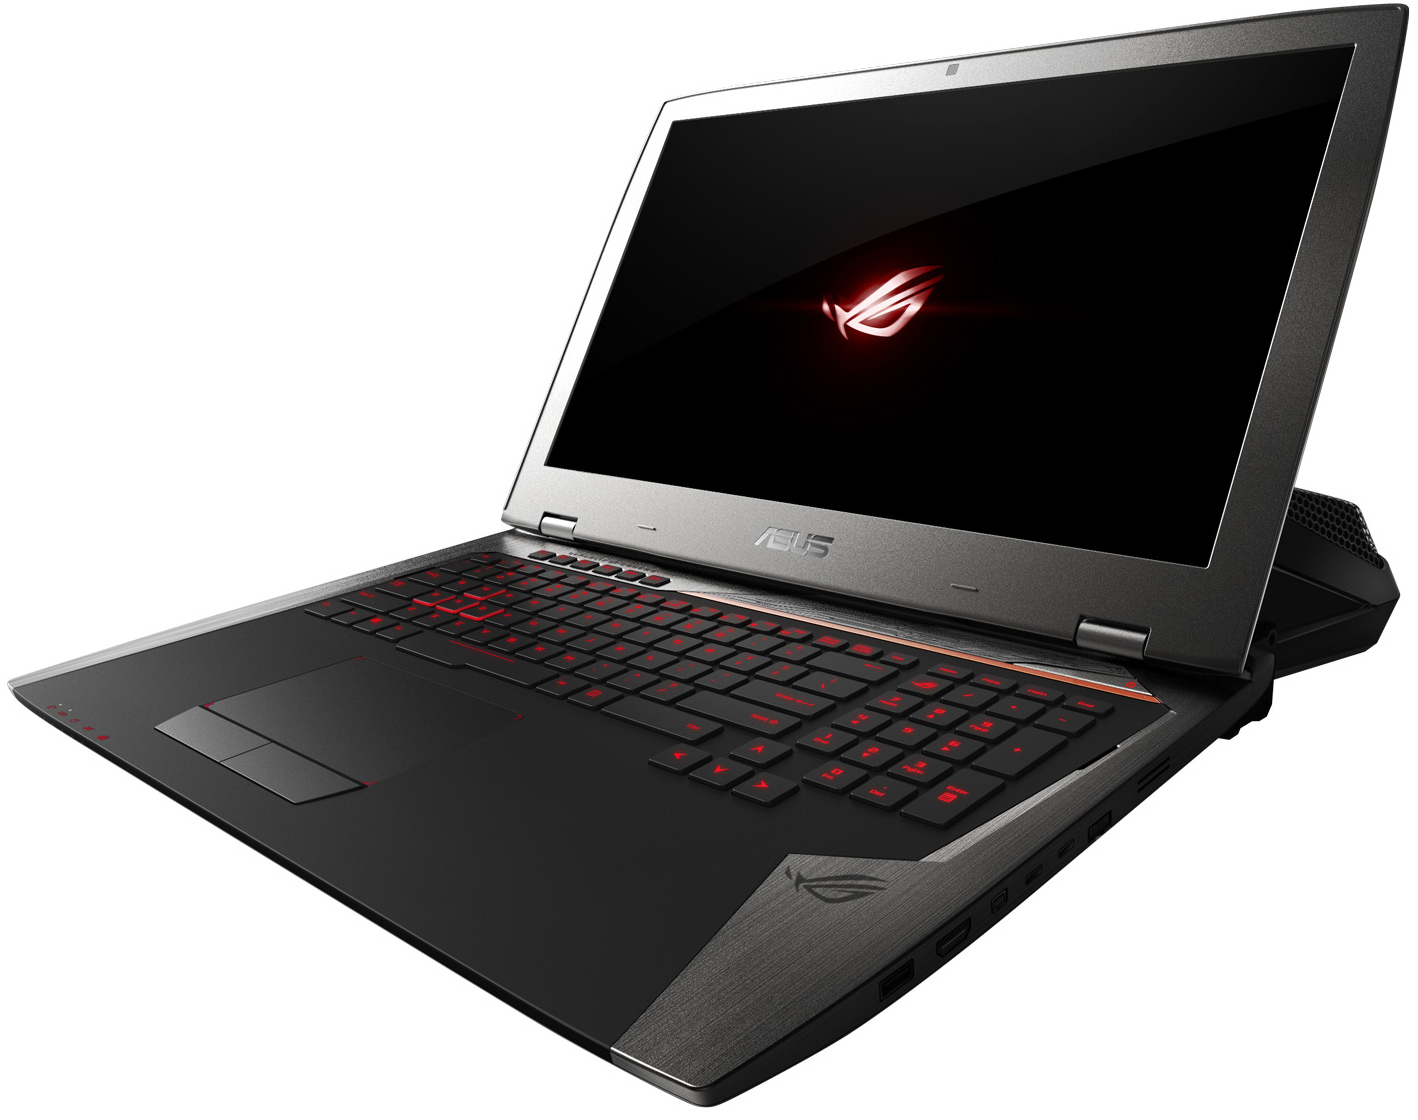  Asus  ROG  GX700 World s first liquid cooled laptop with 4K 